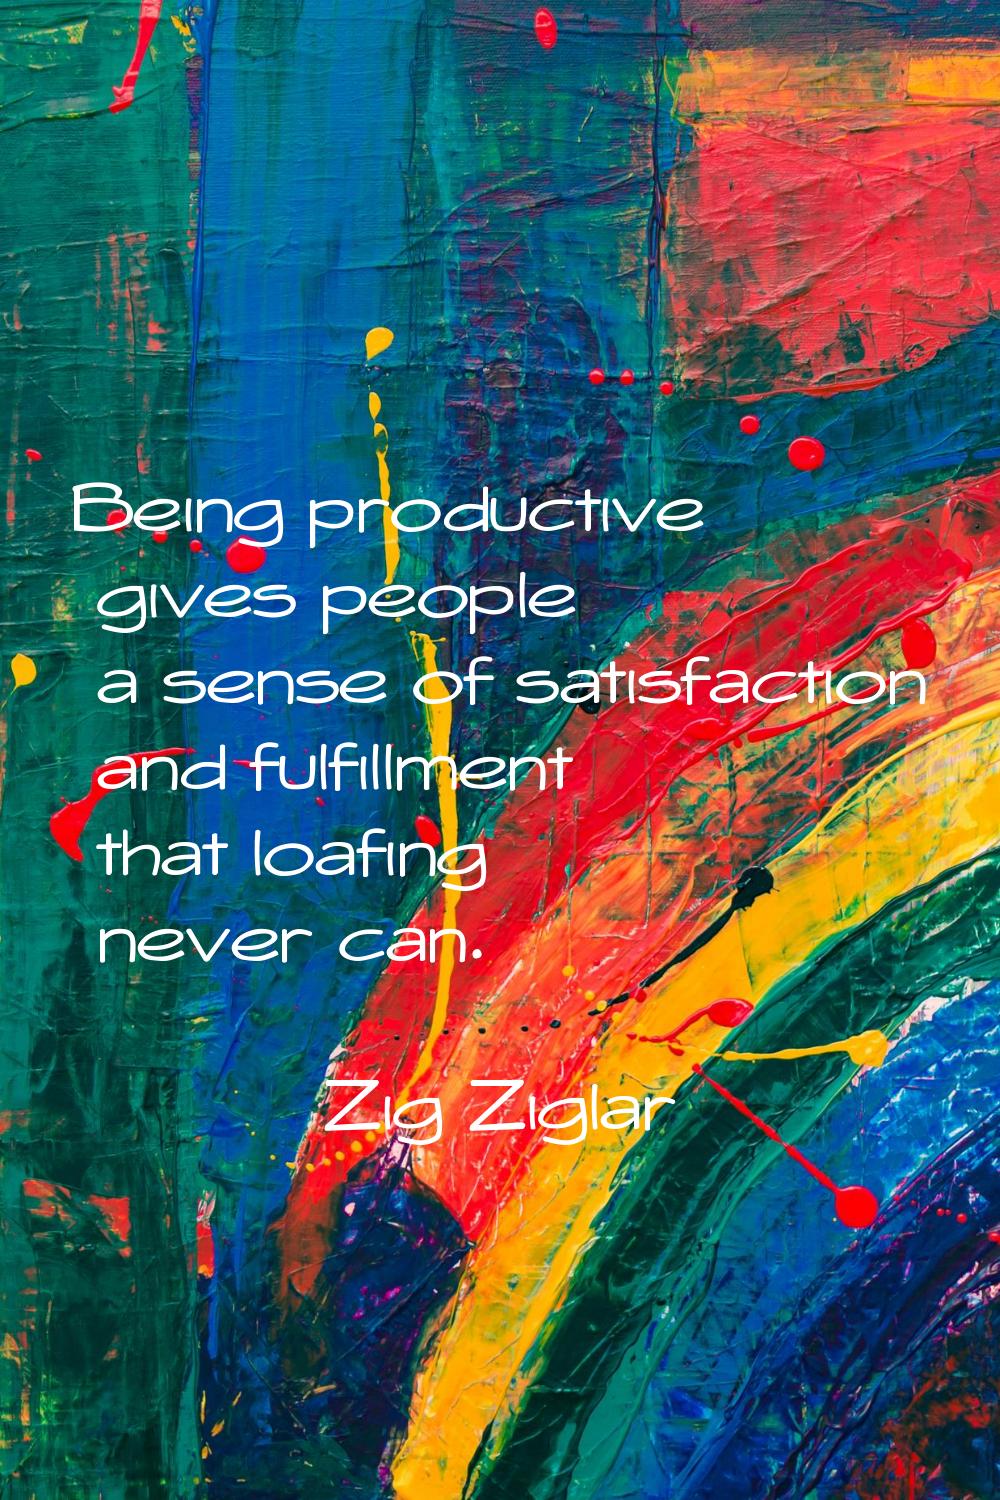 Being productive gives people a sense of satisfaction and fulfillment that loafing never can.